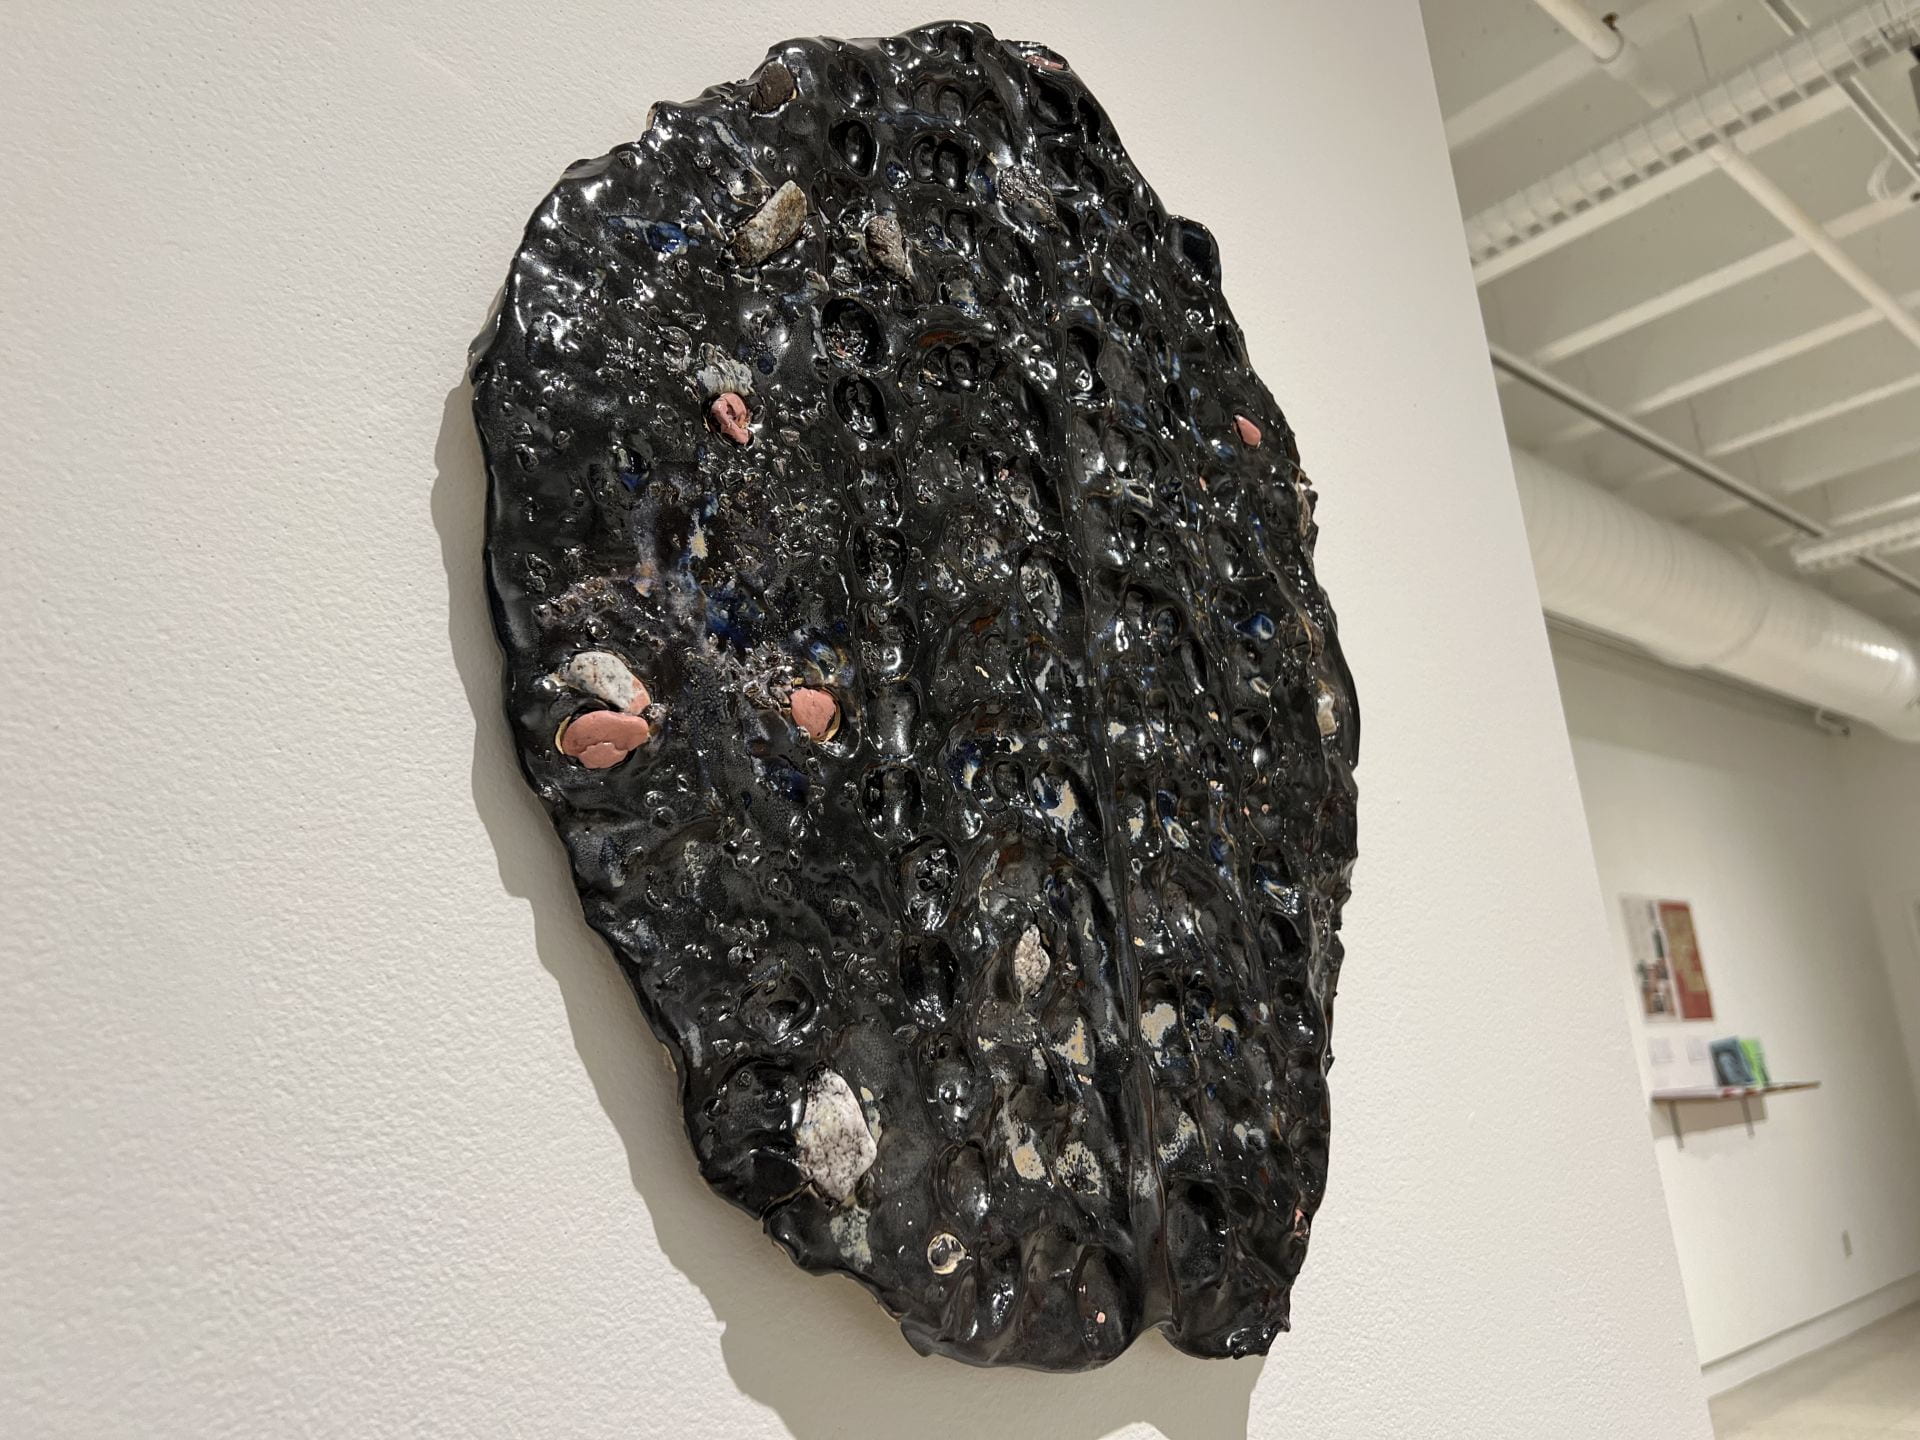 An untitled ceramic piece by first-year Master of Fine Arts student Omni Estabrook is on display at the "Convergence" exhibition in Hopkins Hall Gallery. Credit: Haig Aghjayan | Arts & Life Reporter